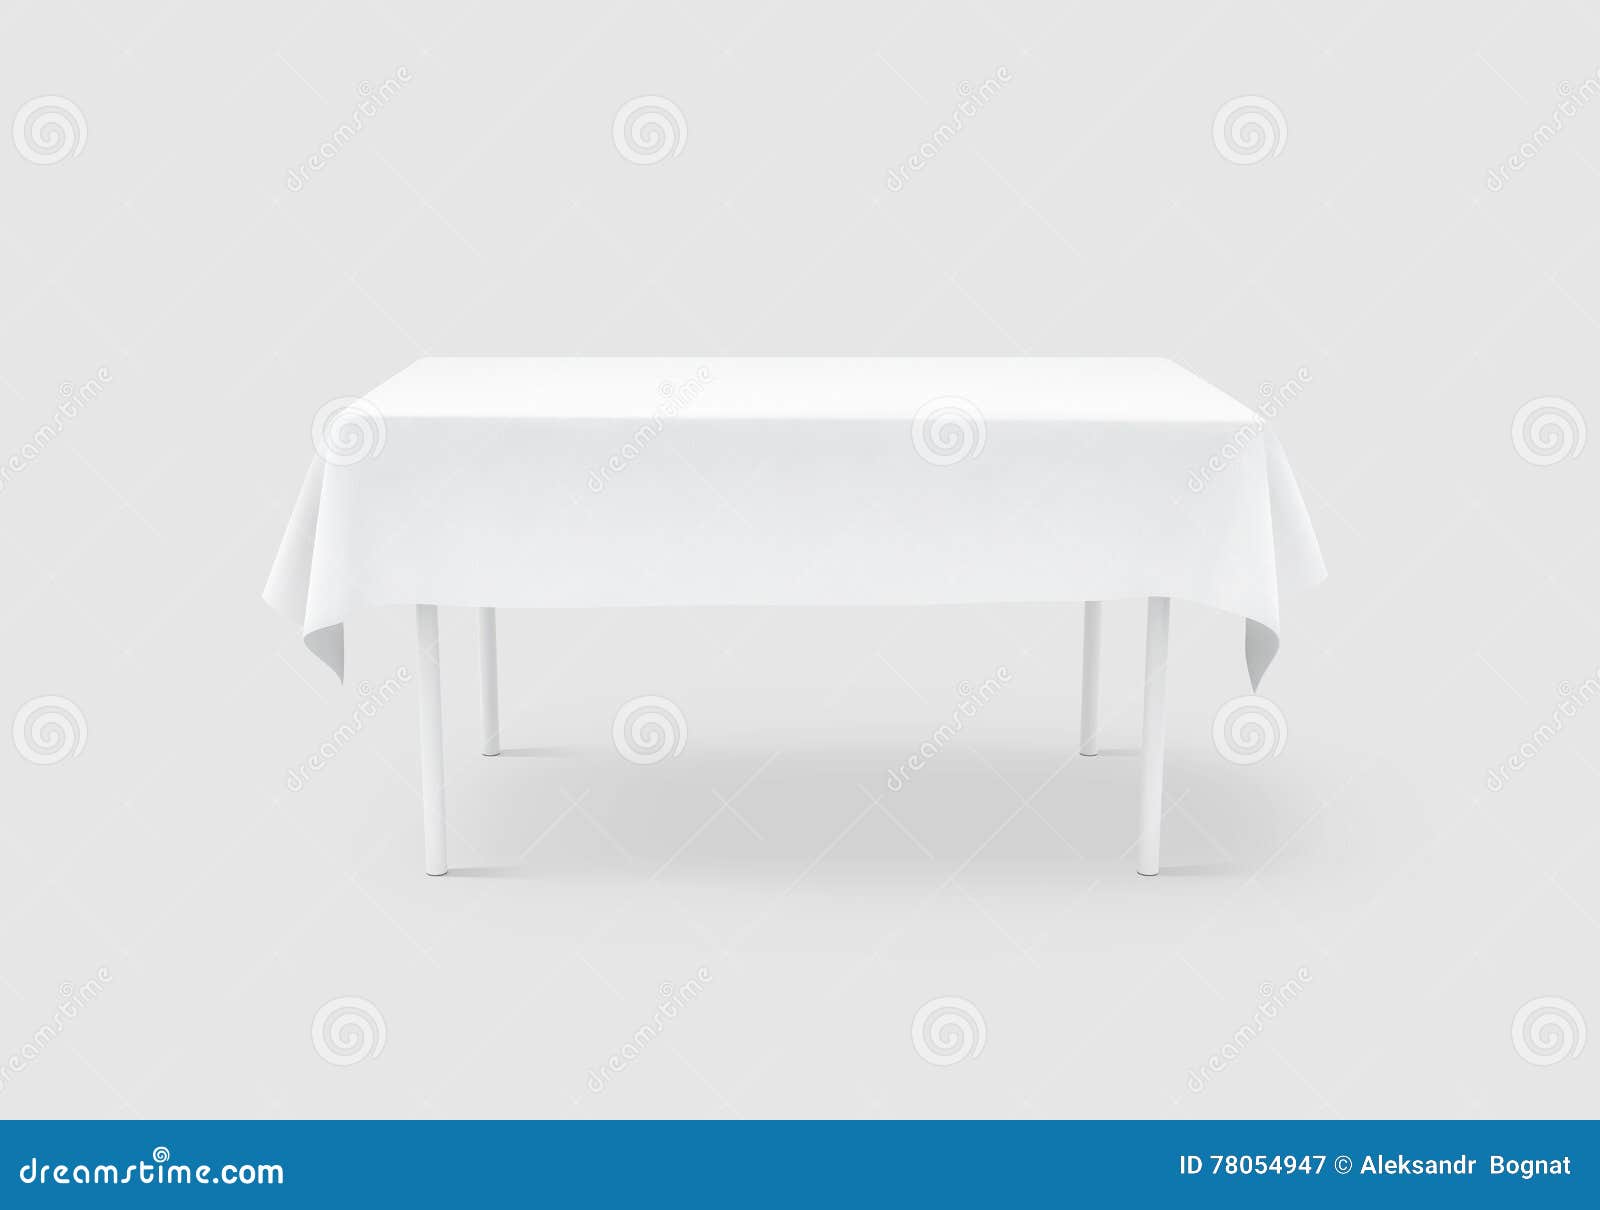 Download Blank White Table Cloth Mock Up, Clipping Path, Stock Illustration - Illustration of rectangular ...